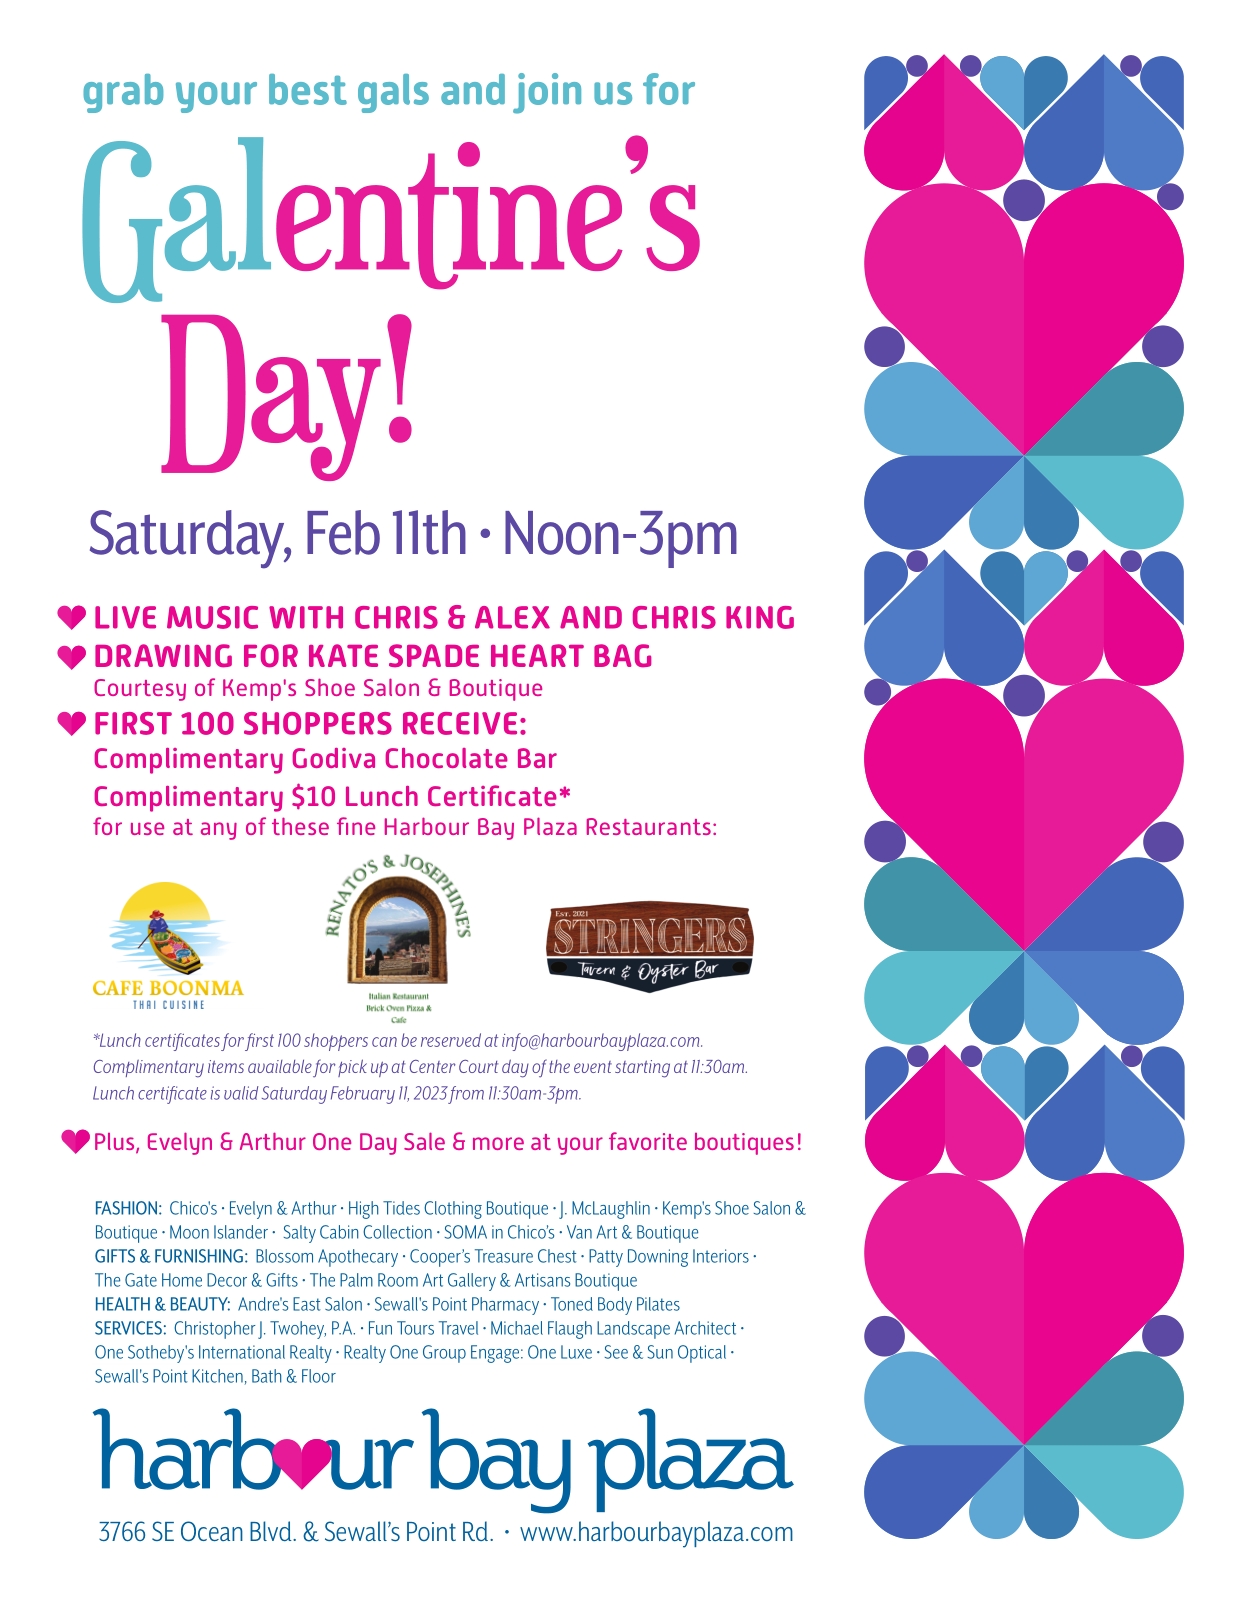 Harbour Bay Plaza GALentine's Day